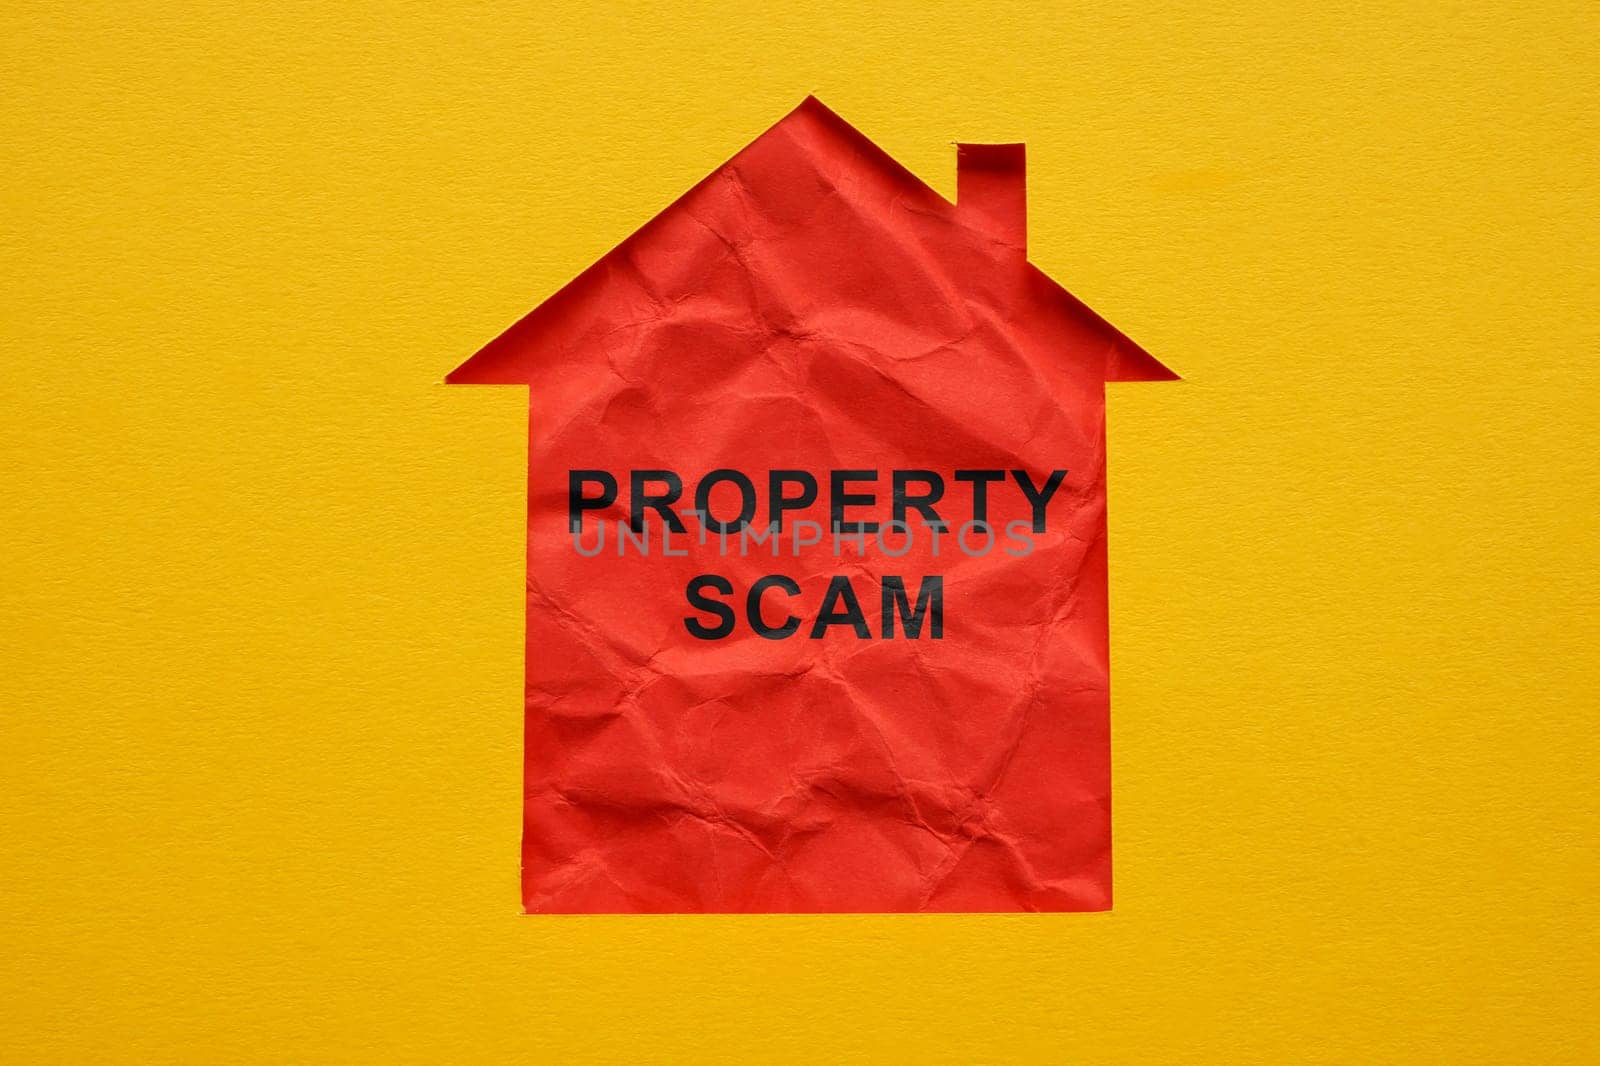 Property scam concept. Outline of house cut out in paper.